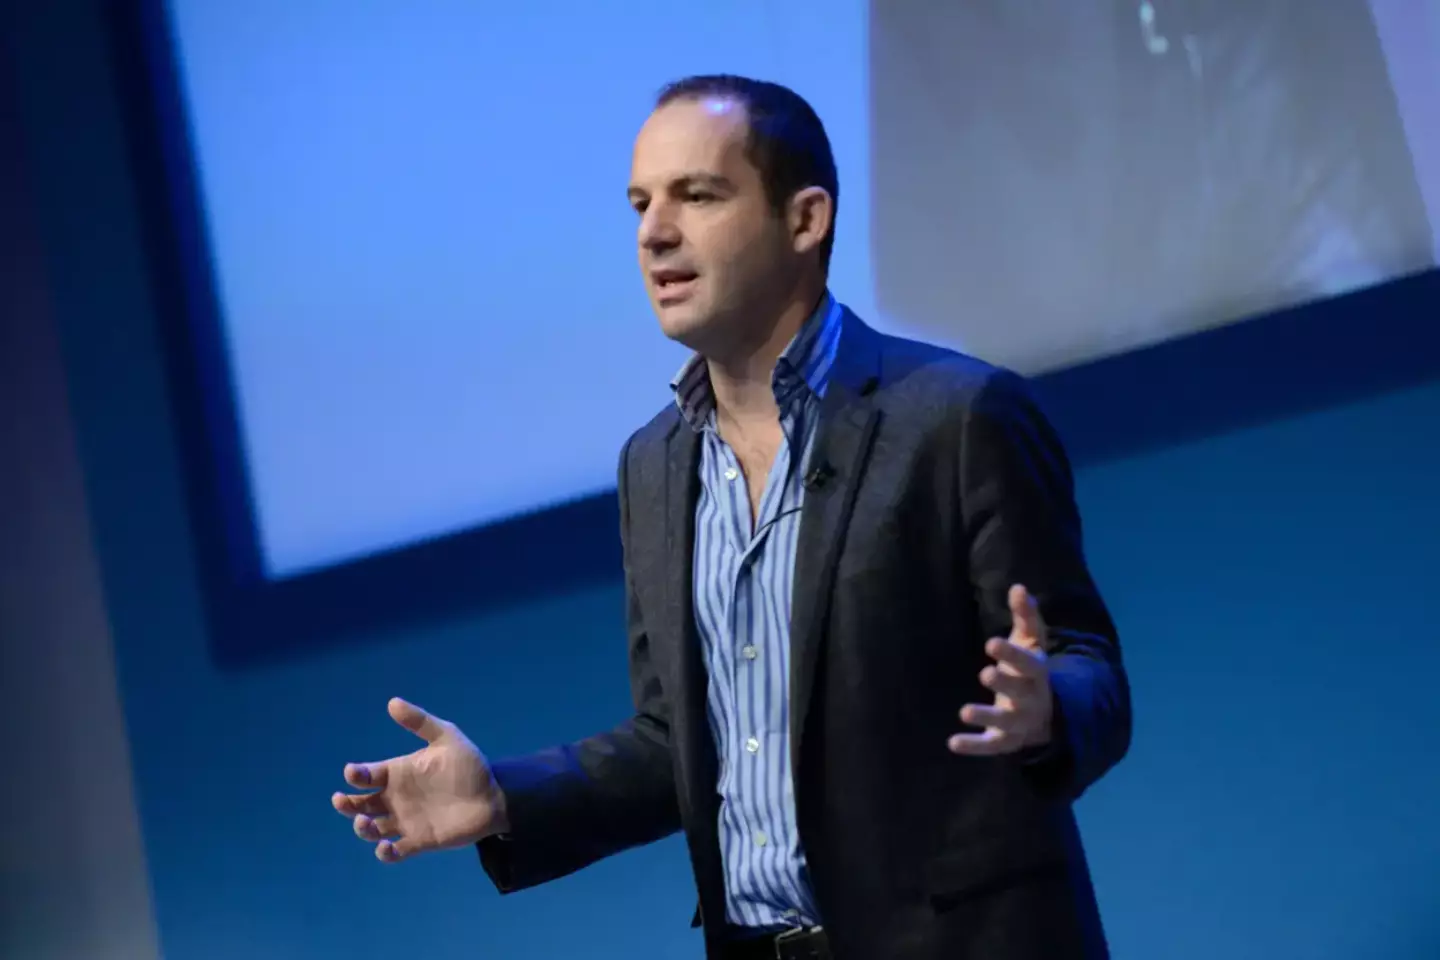 Martin Lewis’s latest advice on the cost of using certain kitchen appliances is so important.